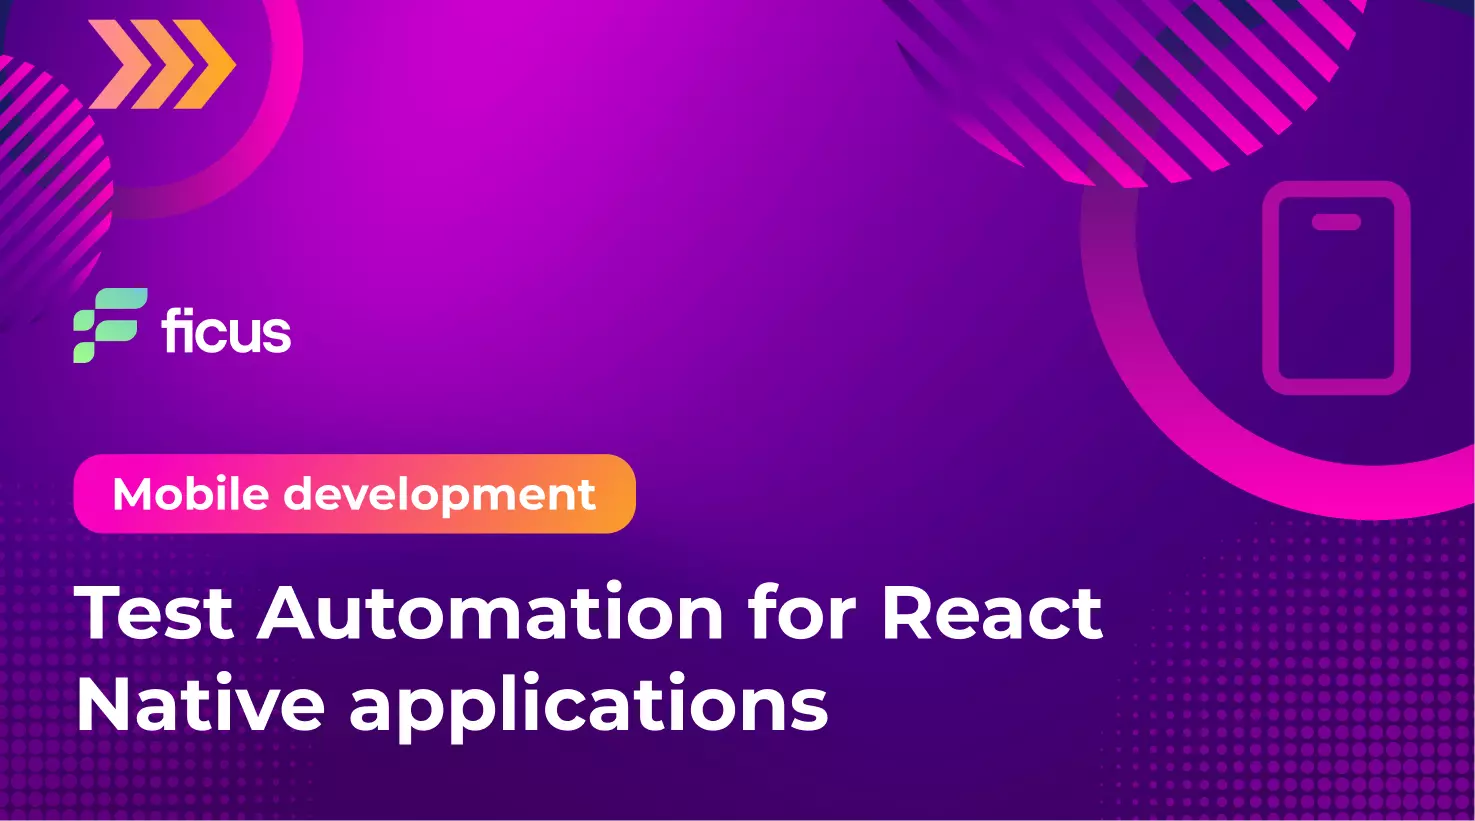 Test Automation for React Native applications